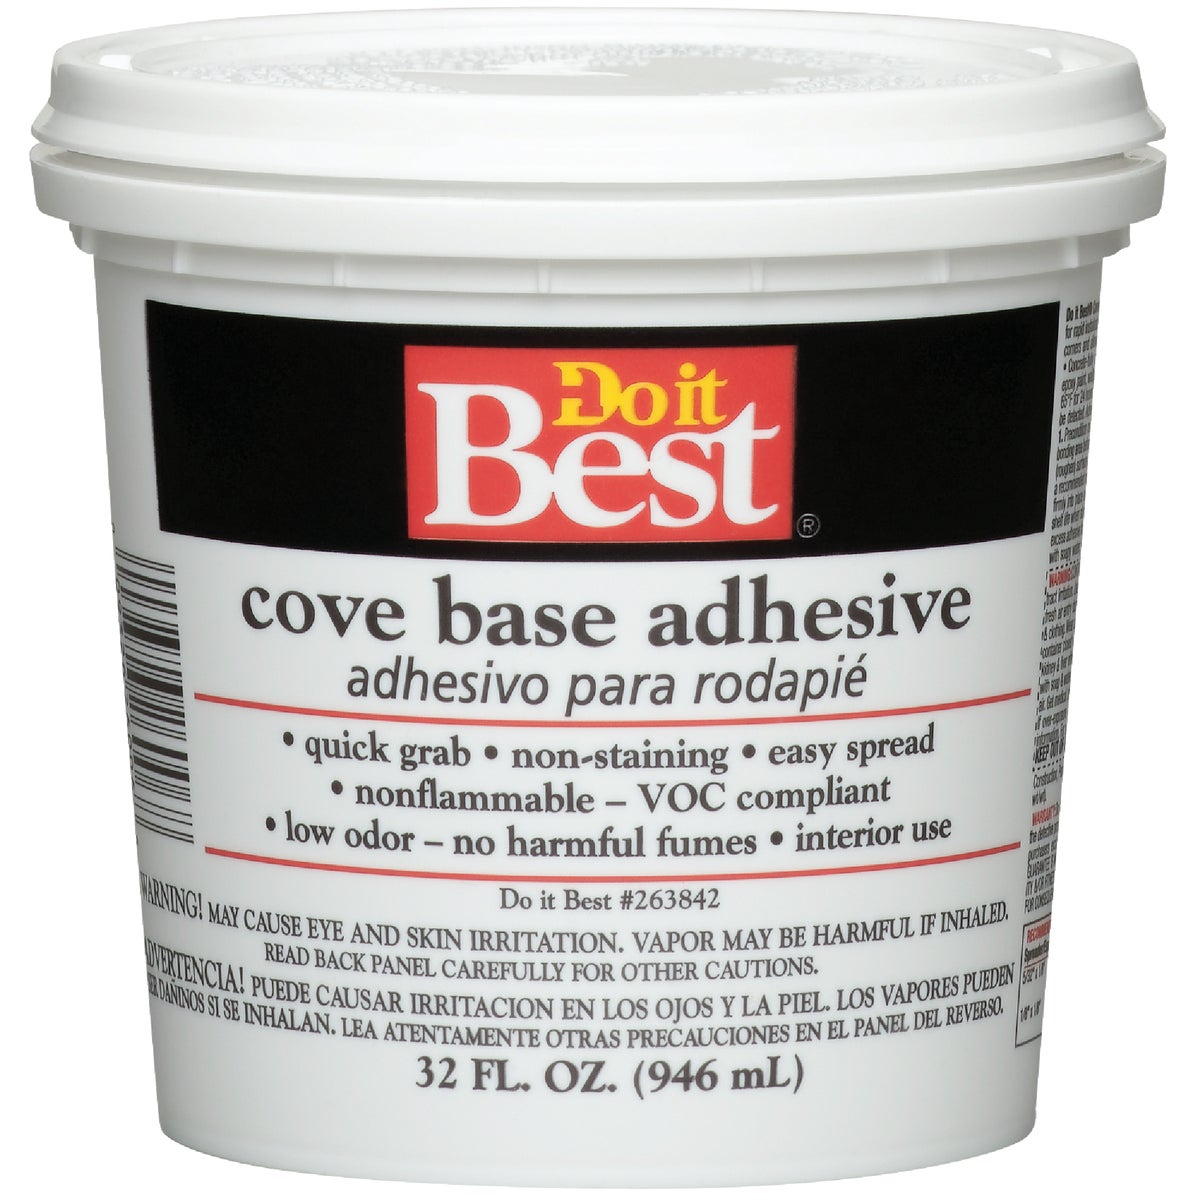 Item 263842, Easy-spread, permanent application of rubber and vinyl cove base.